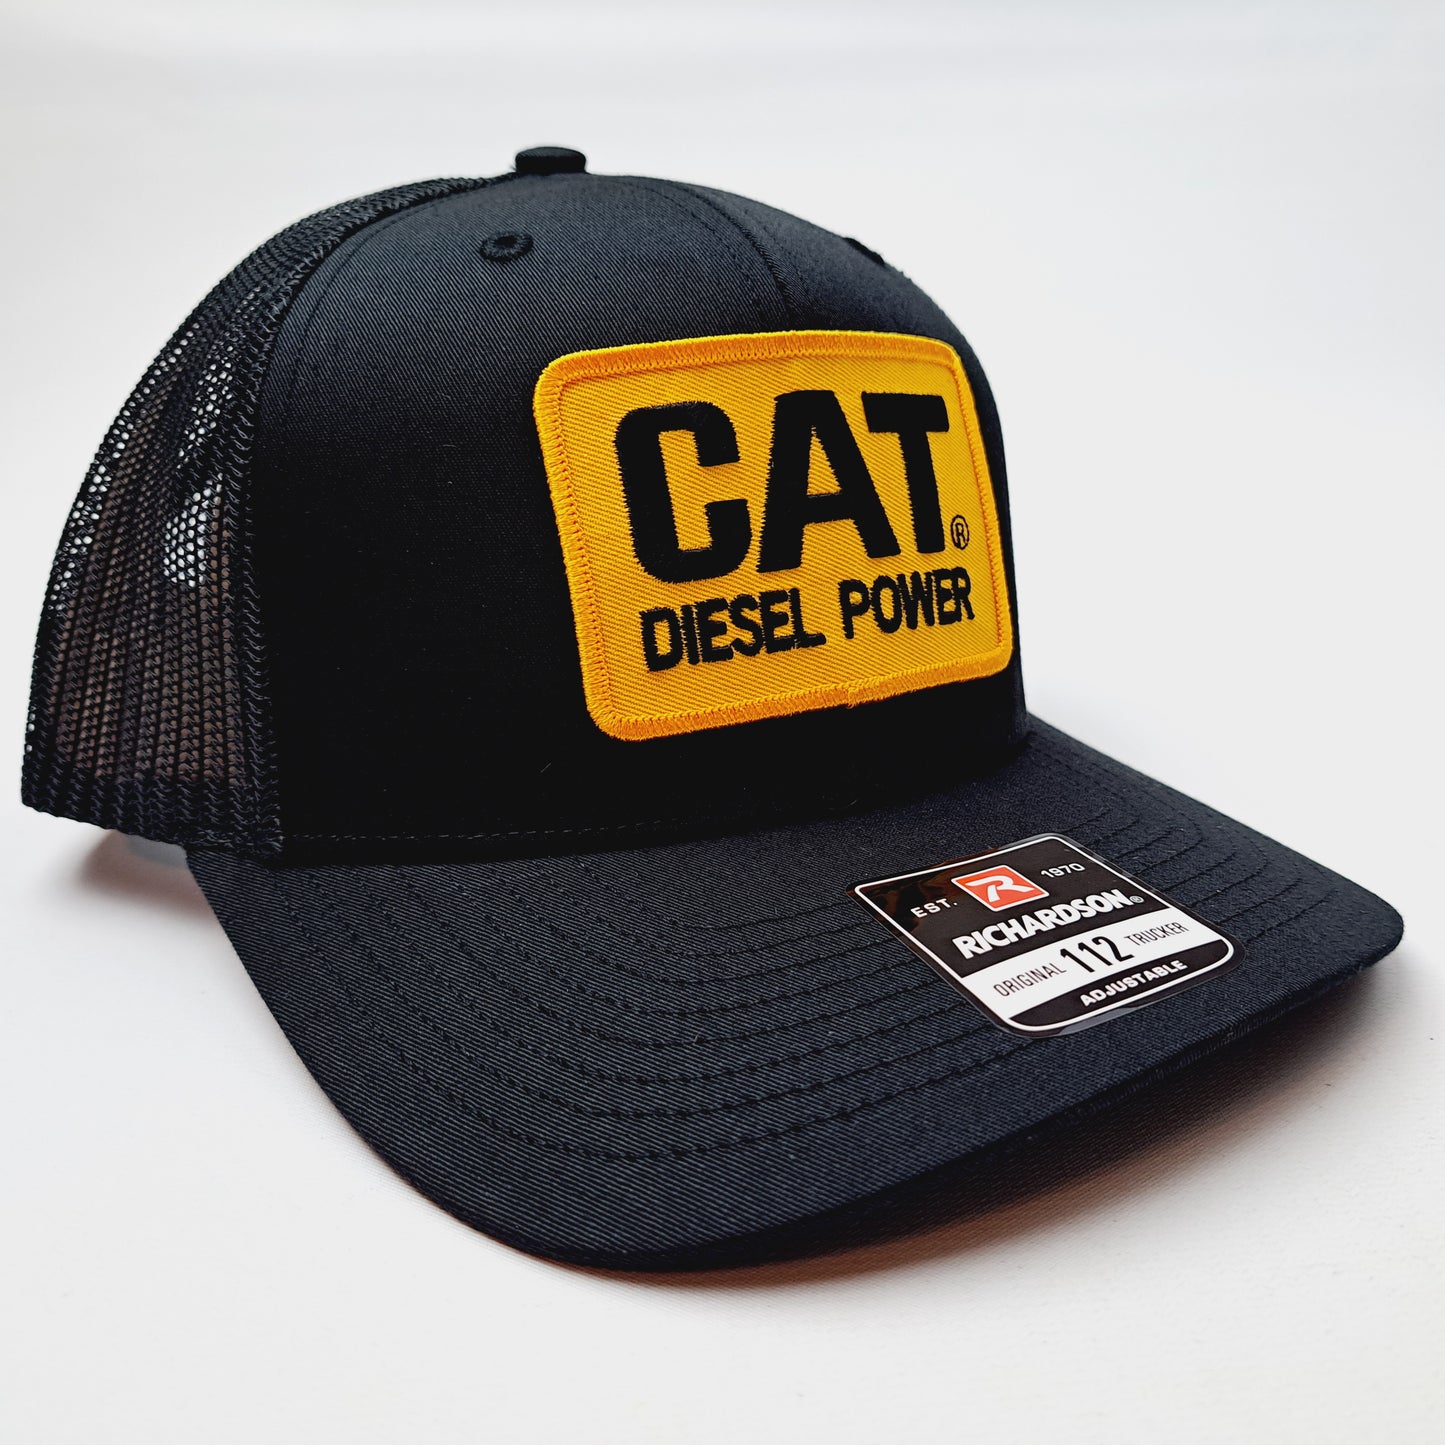 CAT Diesel Power Embroidered Patch Richardson 112 Curved Bill Trucker Mesh Snapback Cap Hat Black